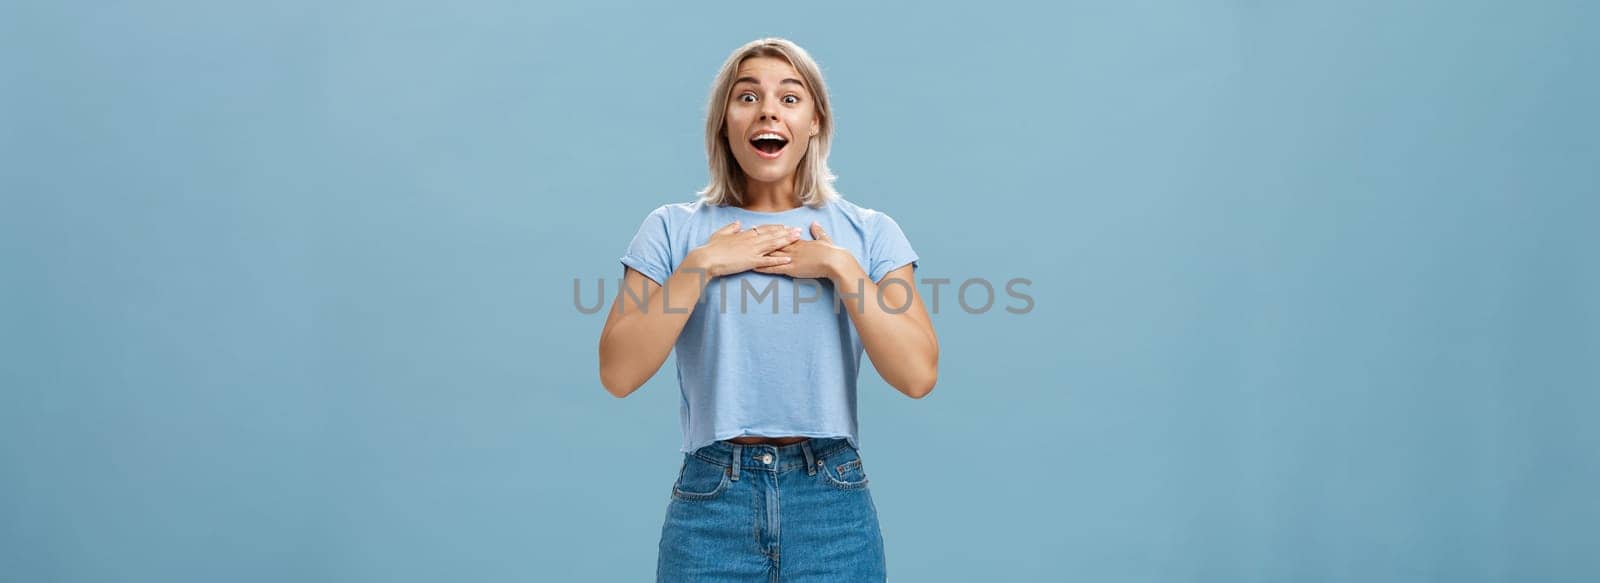 Lifestyle. Portrait of amazed and charmed attractive blond female student with tanned skin in denim shorts and summer t-shirt holding palms on breast gasping and smiling joyfully being grateful and pleased.